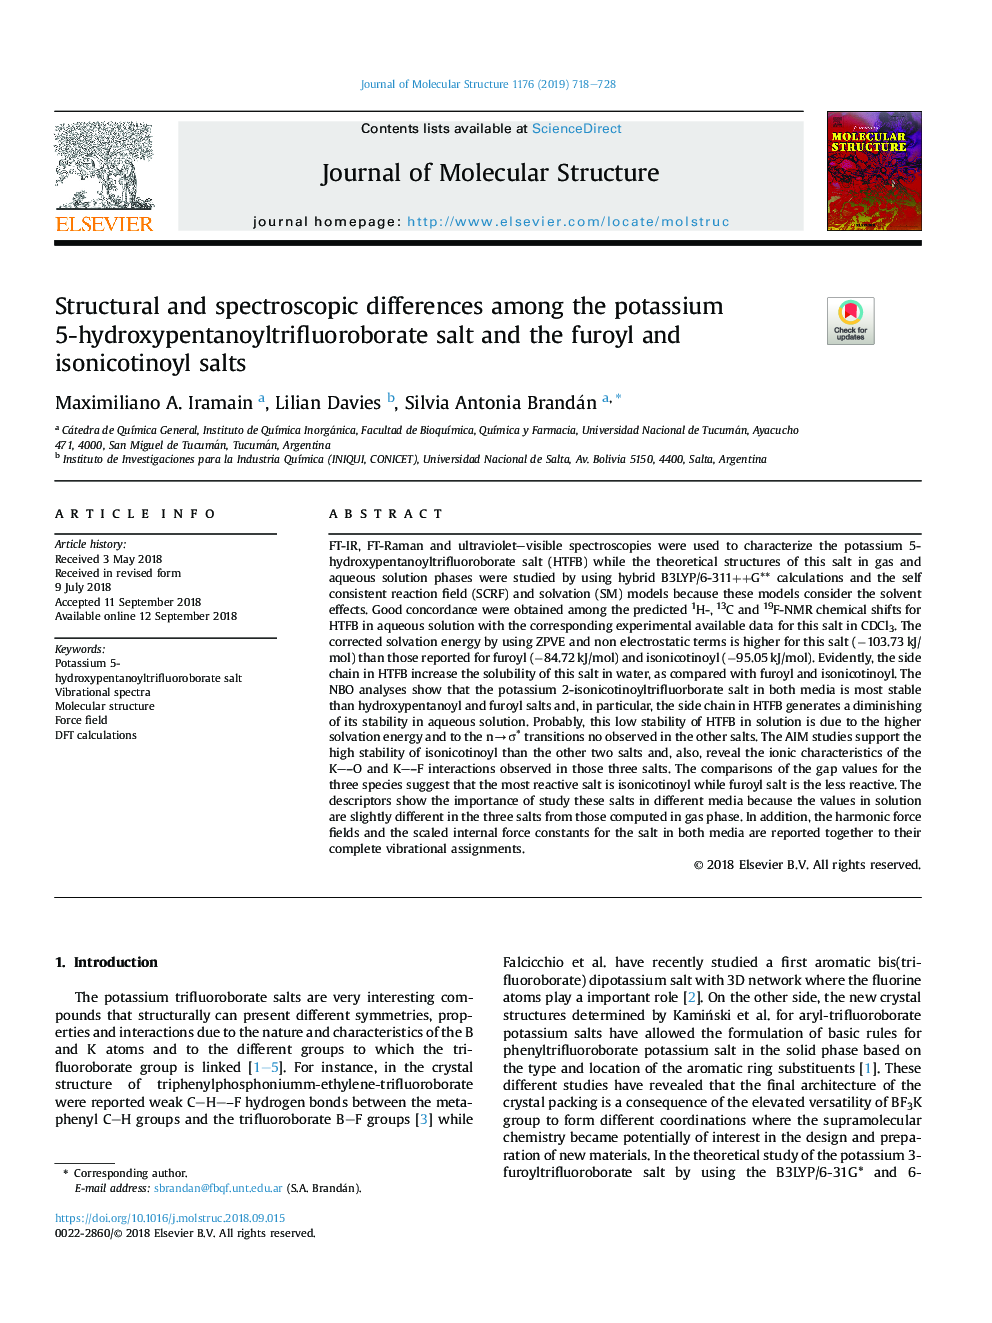 Structural and spectroscopic differences among the potassium 5-hydroxypentanoyltrifluoroborate salt and the furoyl and isonicotinoyl salts